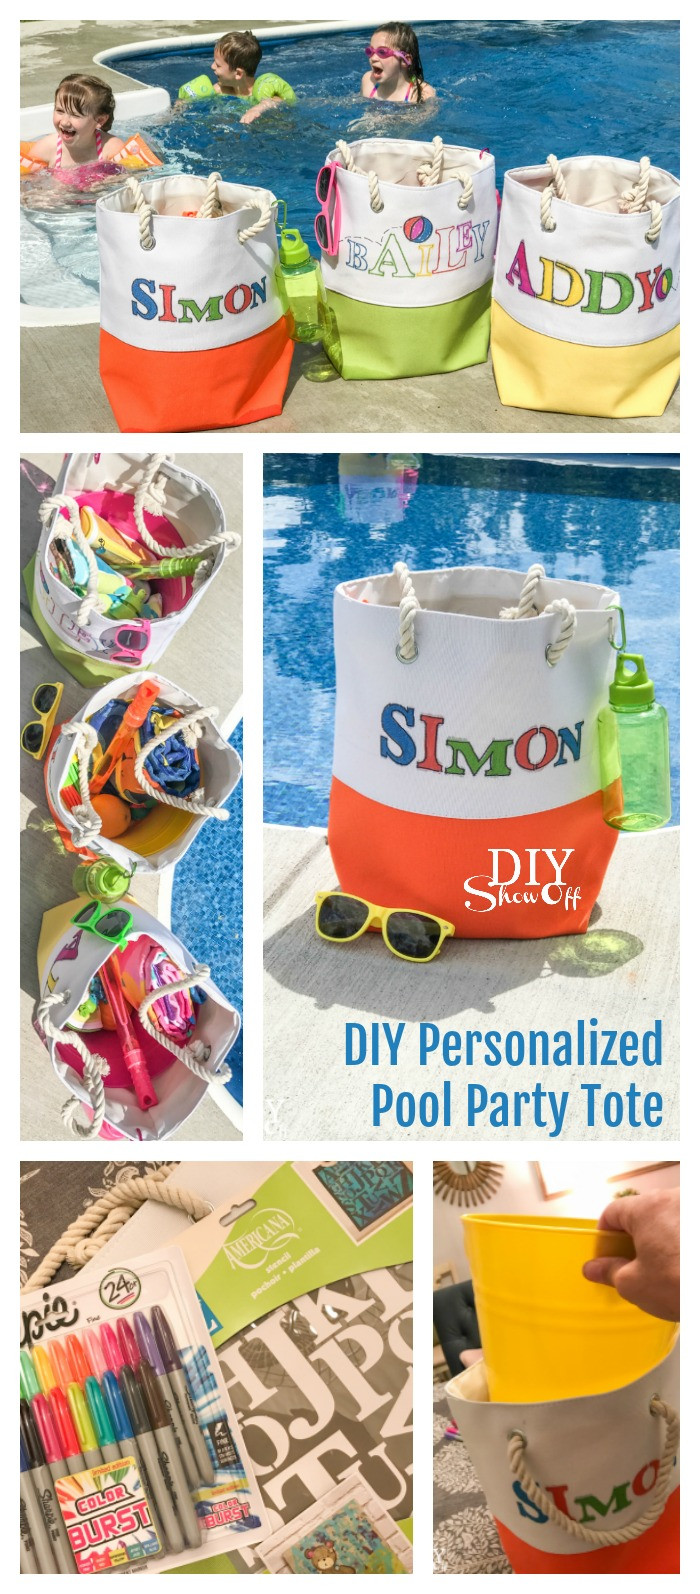 Pool Party Hostess Gift Ideas
 DIY Personalized Pool Party Gift Tote DIY Show f